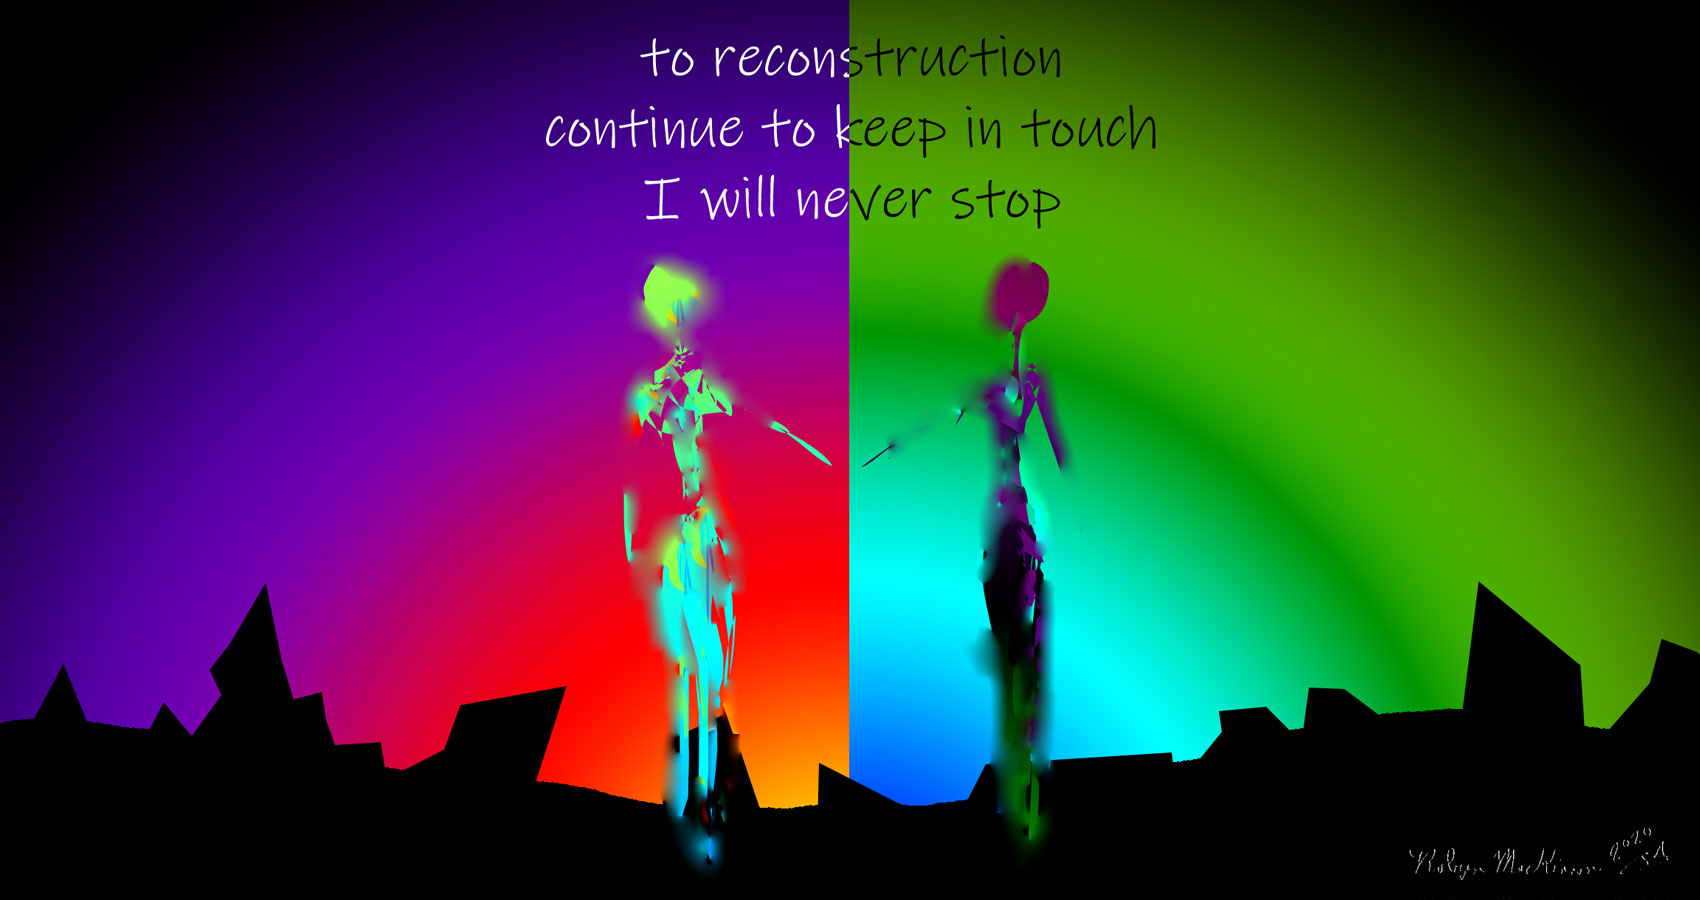 Reconstruction, a haiku by Robyn MacKinnon at Spillwords.com